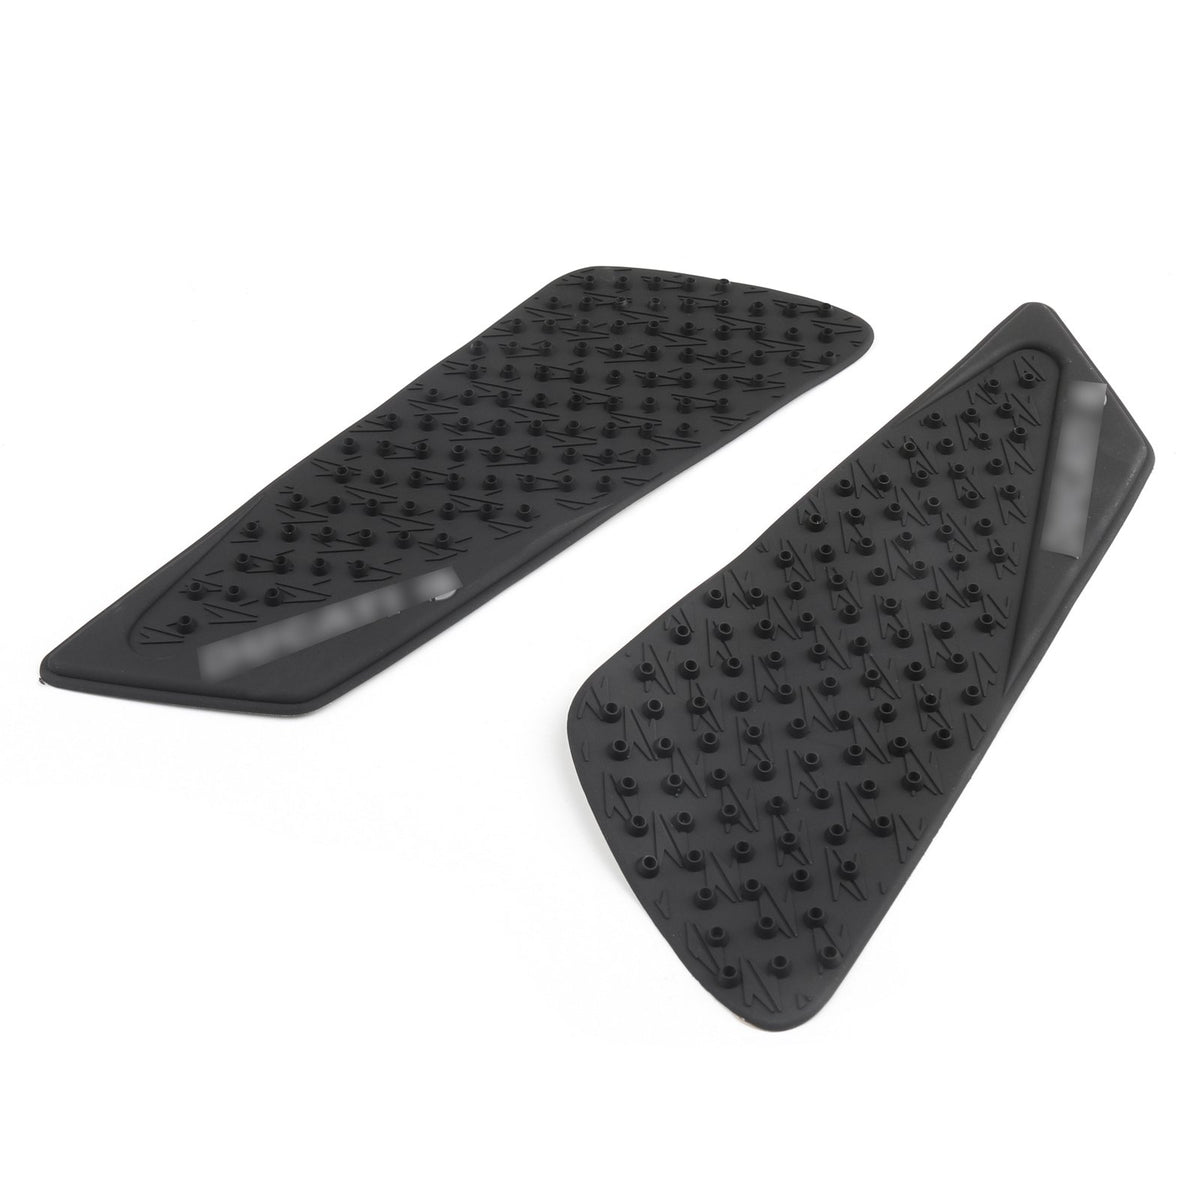 Traction Tank Side Pad Gas Knee Grip Protector Decal Fit For Ducati 848 1098 1198 2008-2014